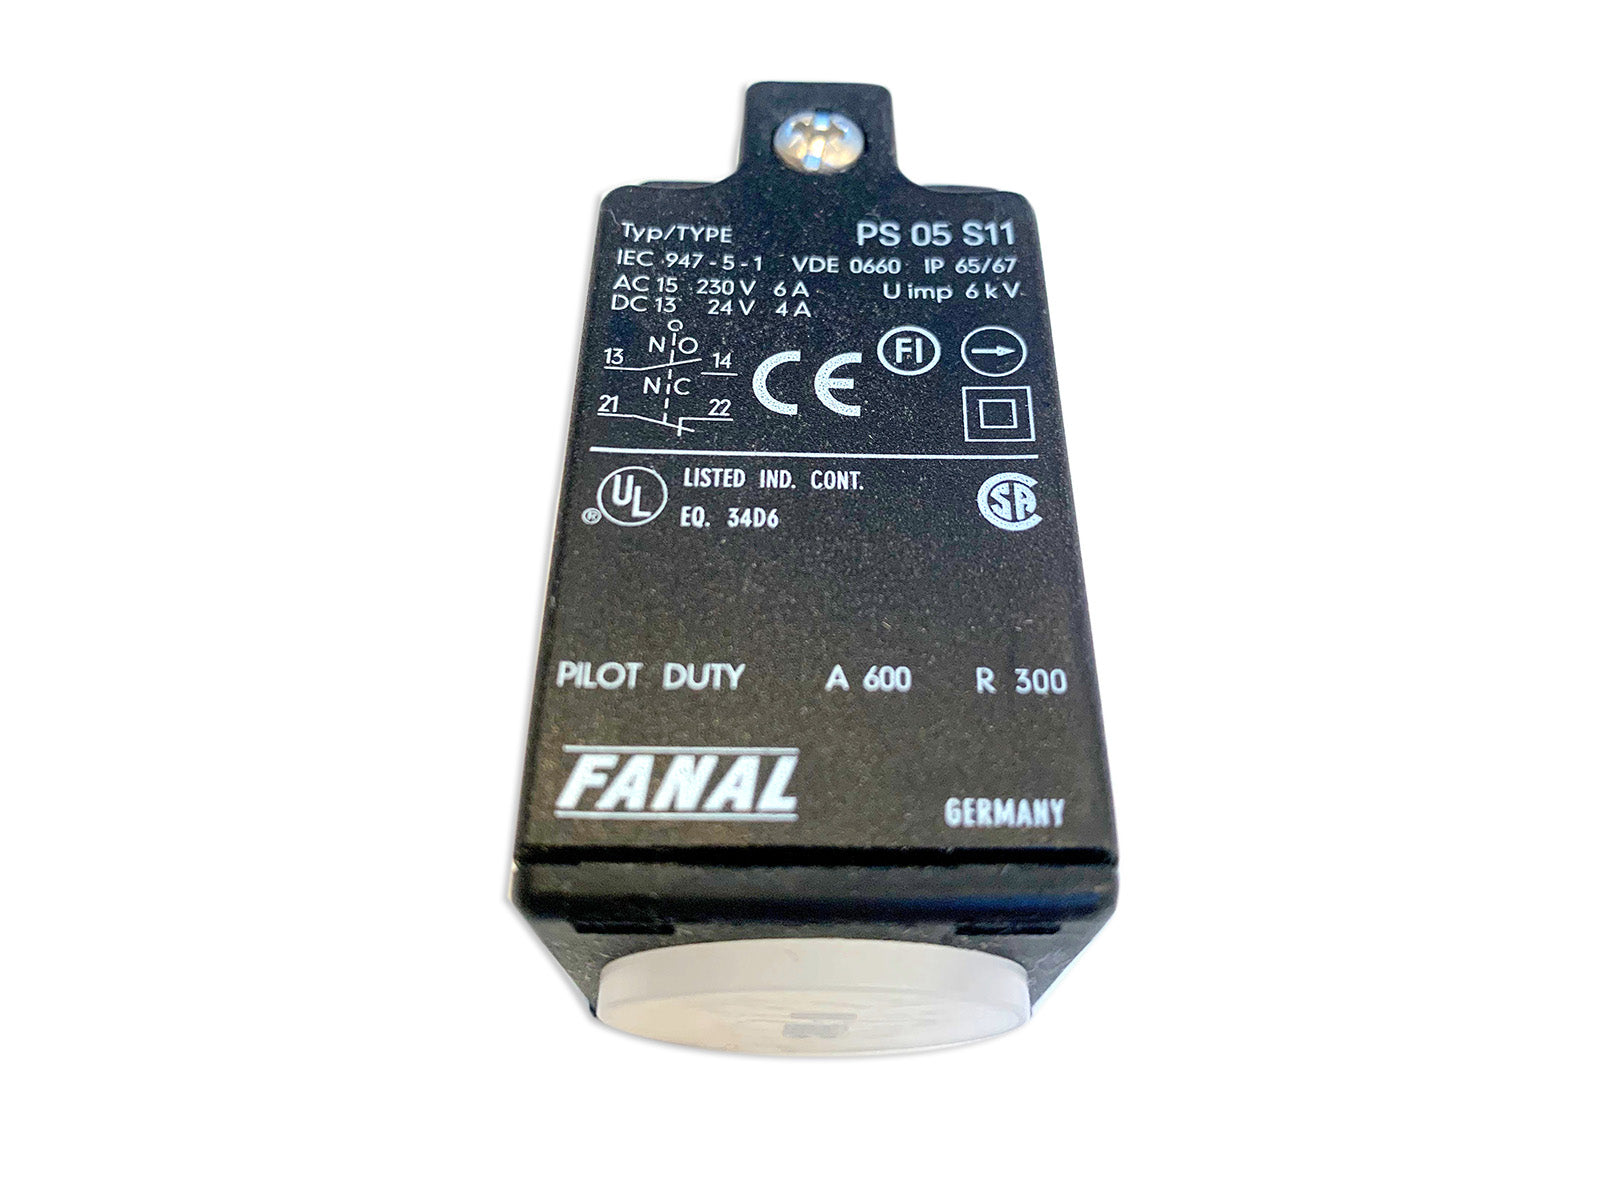 Fanal Position Switch Type PS 05 S11 - ppdistributors